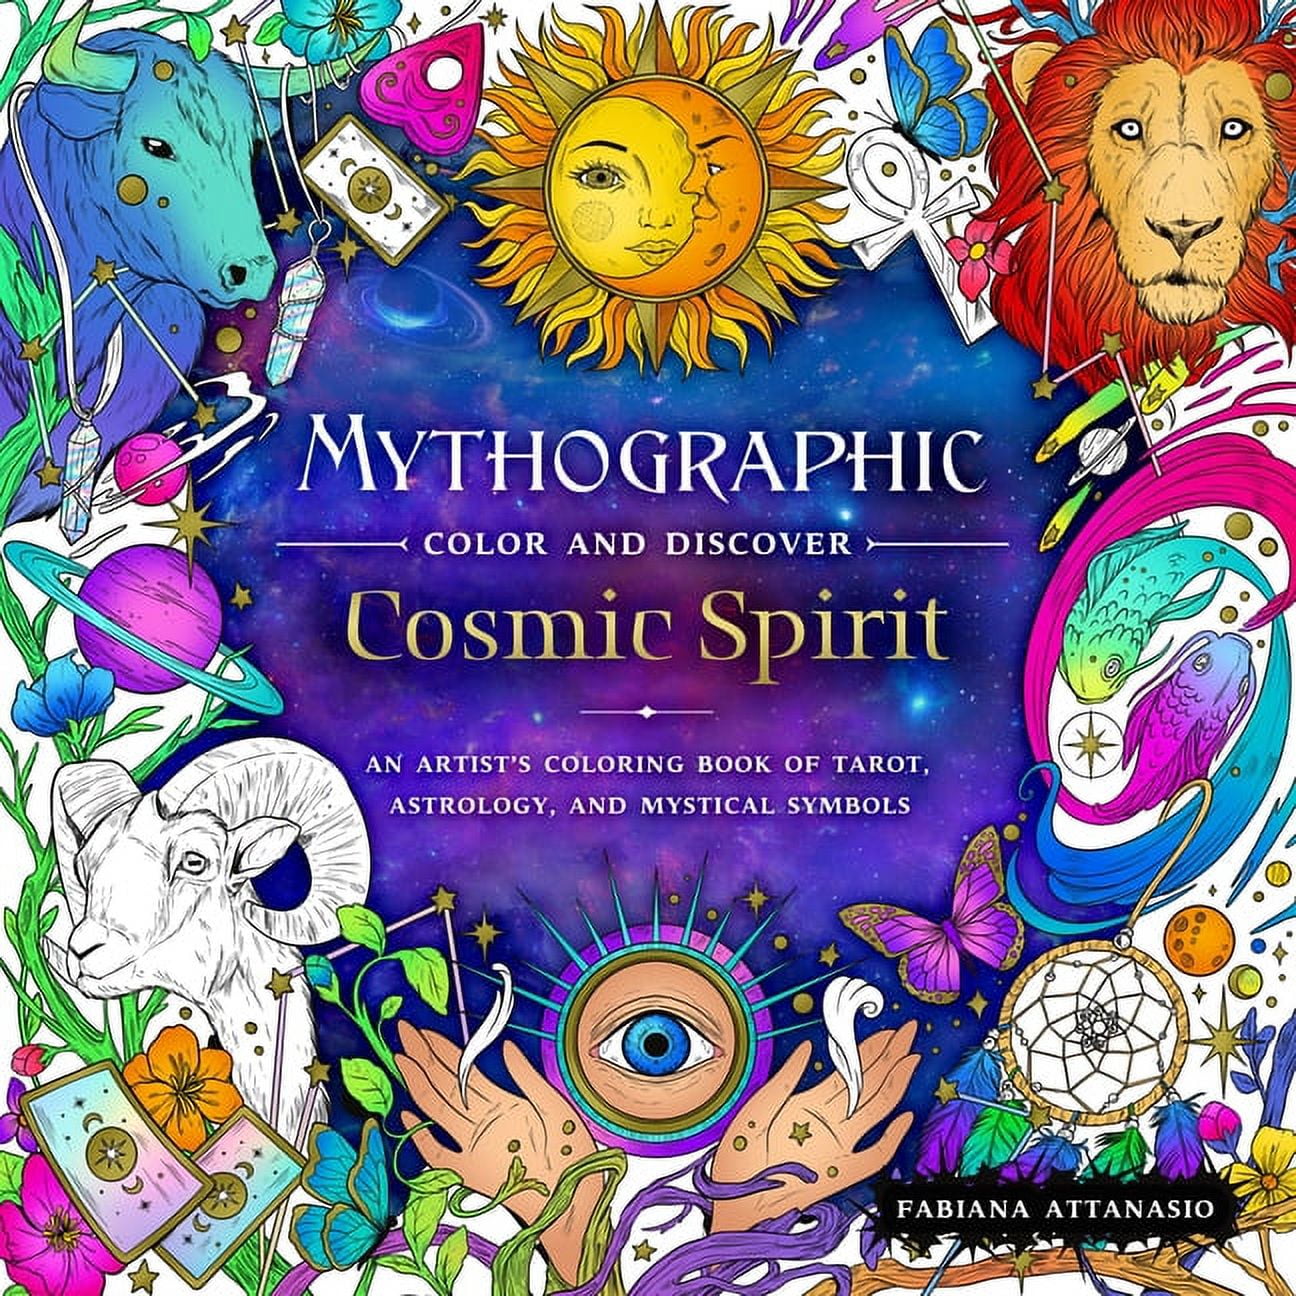 12 Mythographic/animals ideas  coloring books, adult coloring